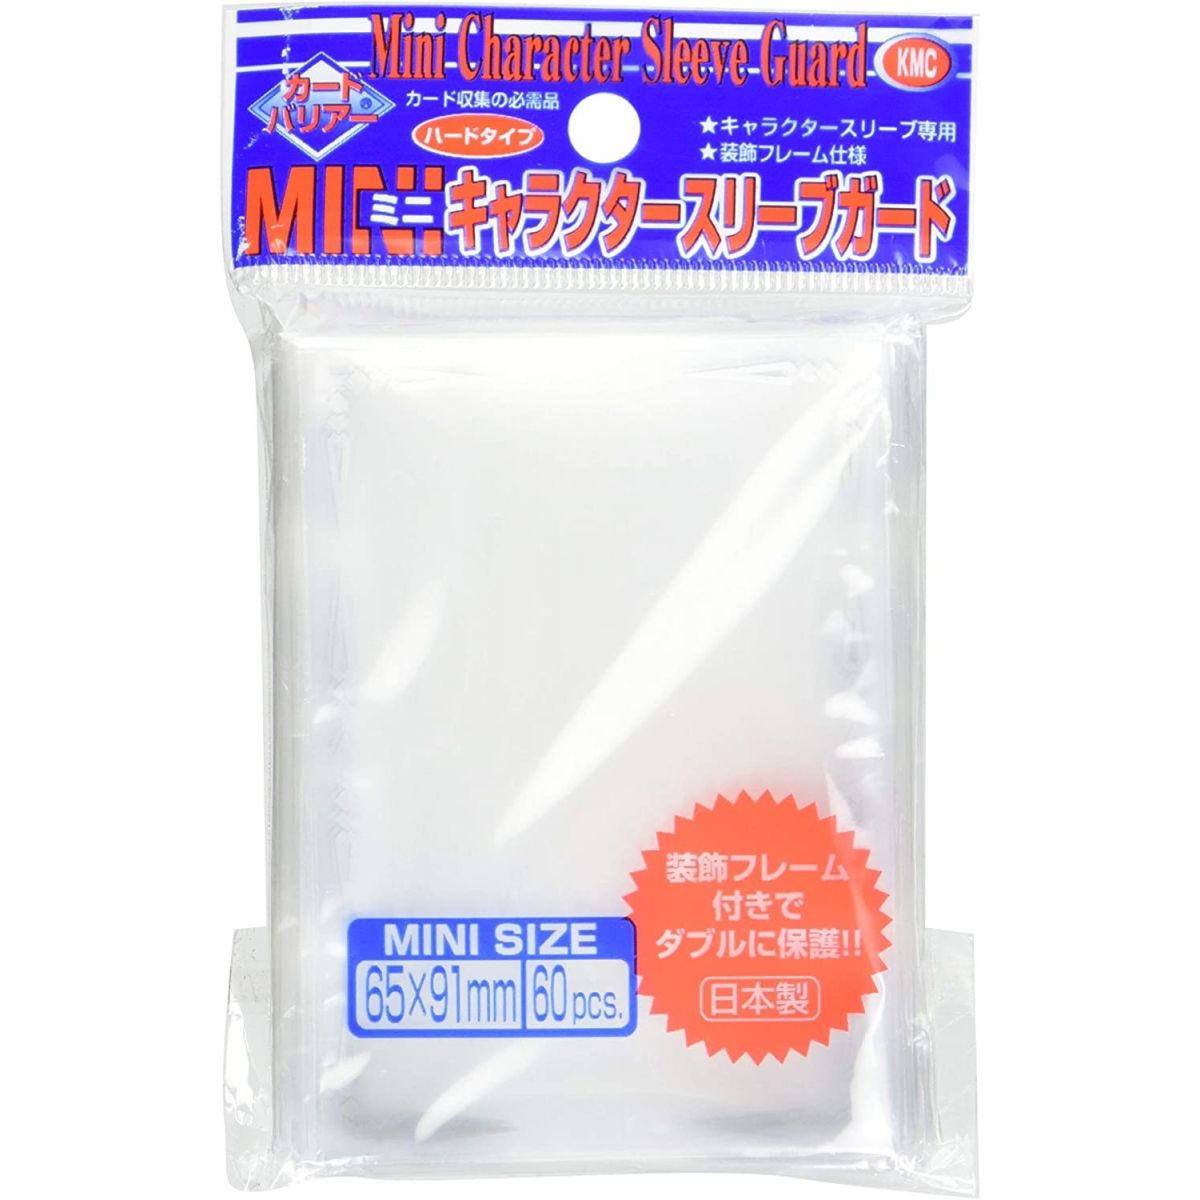 Item KMC - Over-Sleeves - Small - Mini Character Sleeve Guard